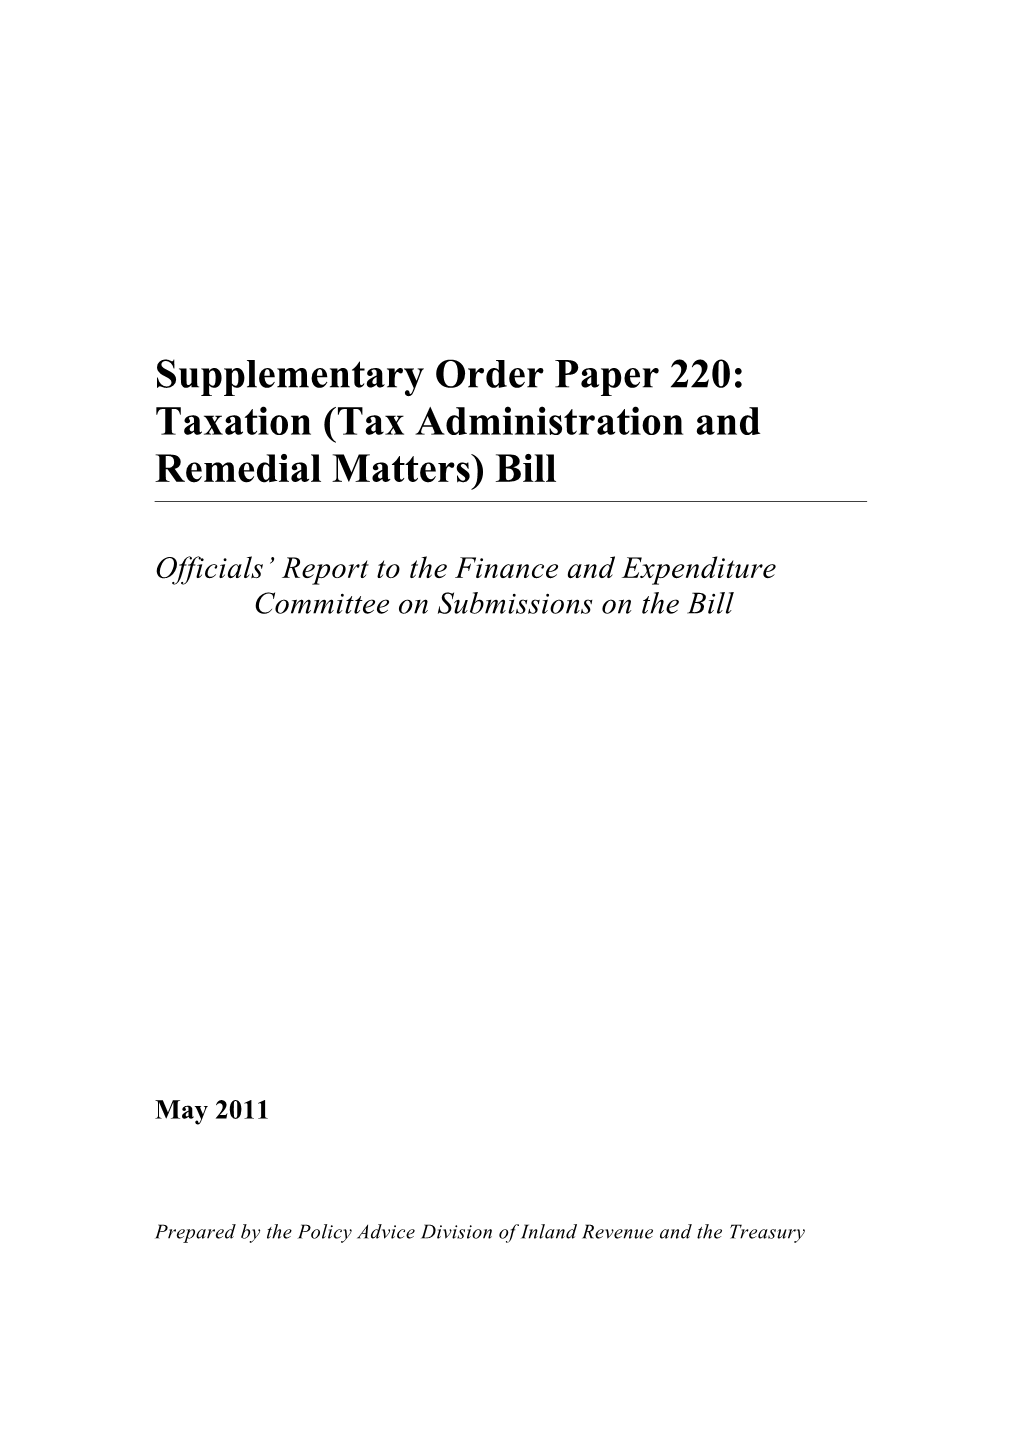 Supplementary Order Paper 220: Taxation (Tax Administration and Remedial Matters) Bill 2010